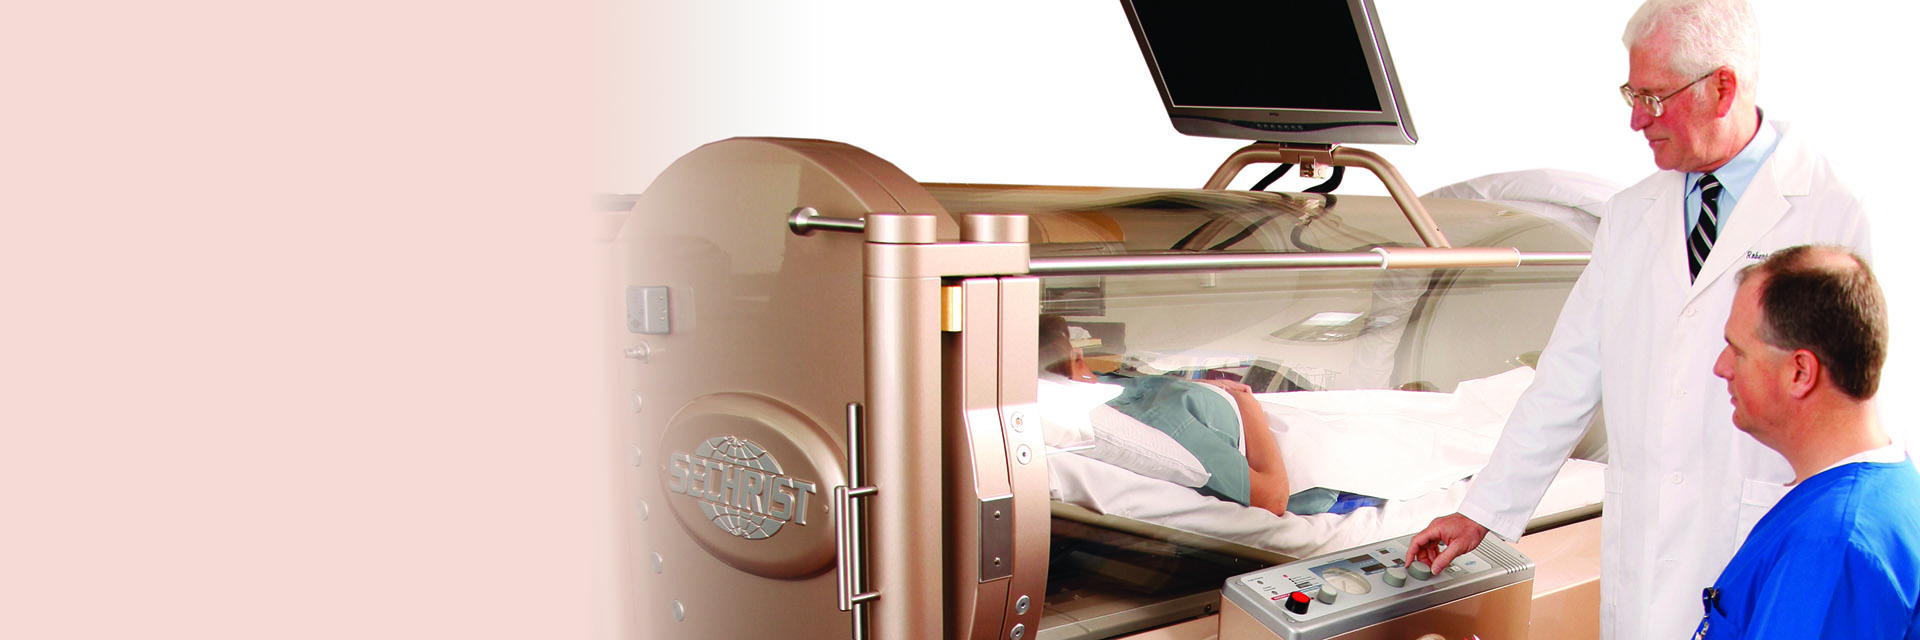 Doctor, Technician and Patient in a Hyperbaric Chamber